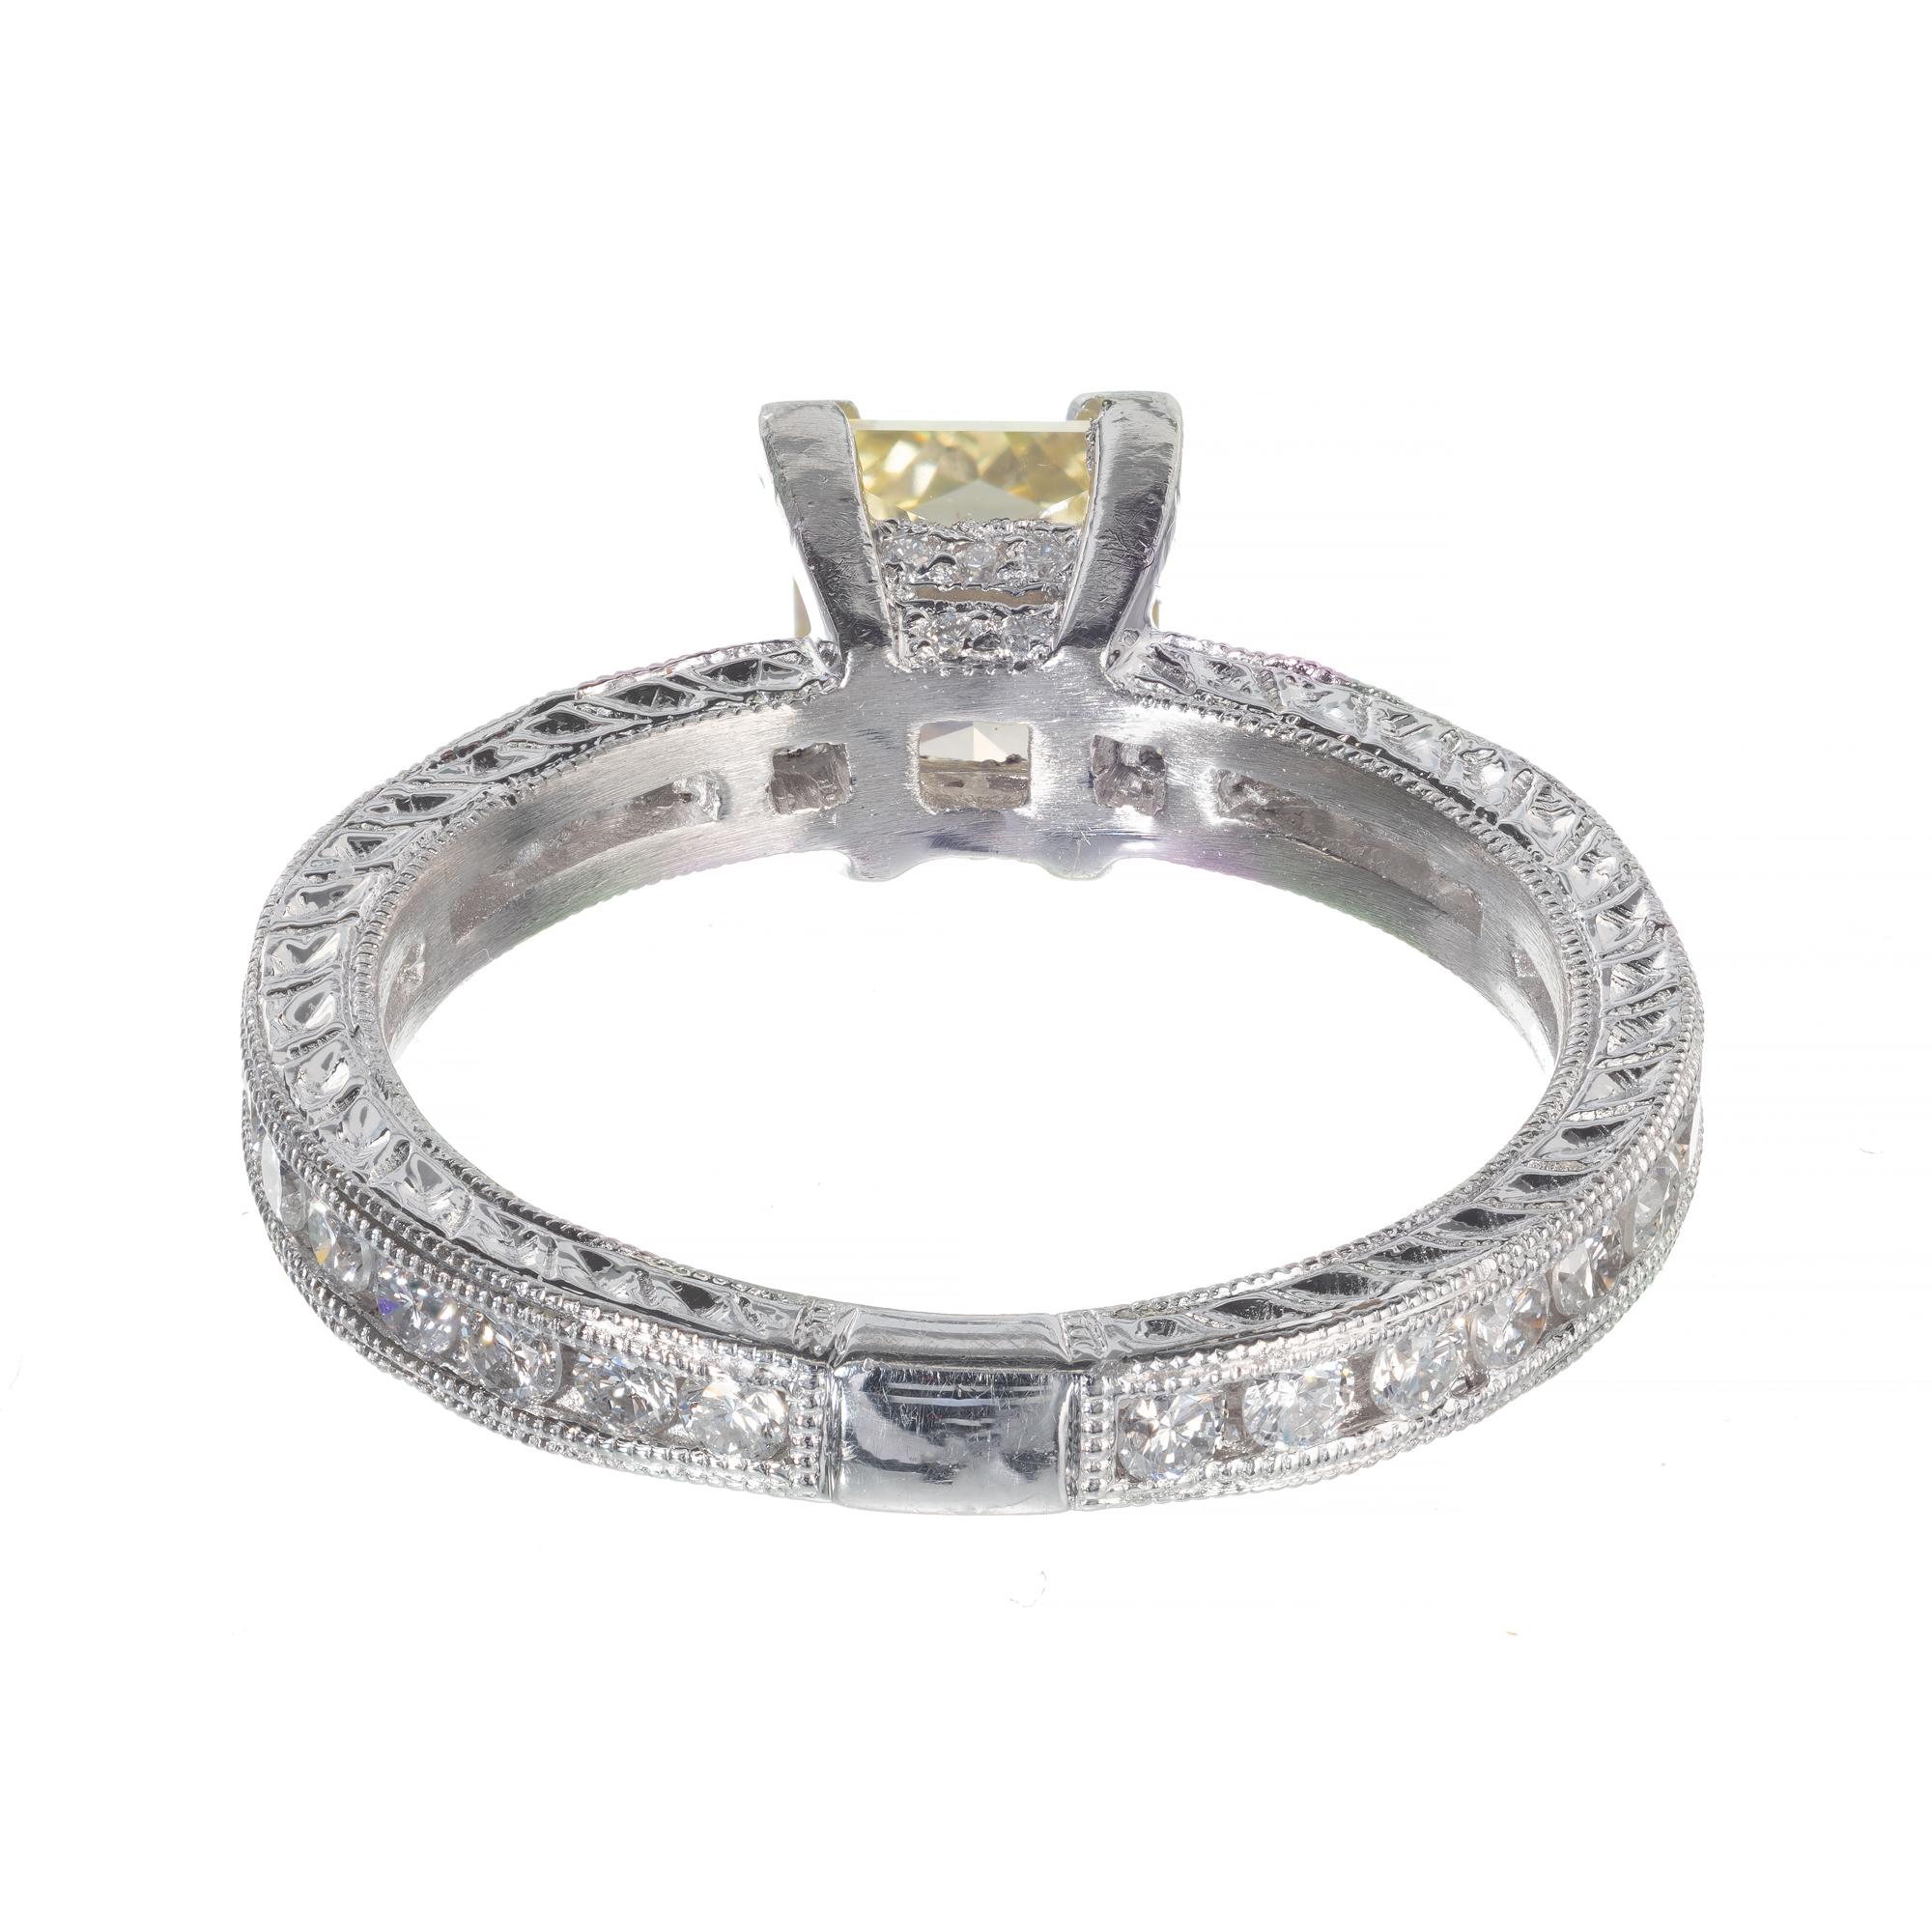 Peter Suchy GIA Certified 1.04 Carat Yellow Diamond Platinum Engagement Ring In New Condition For Sale In Stamford, CT